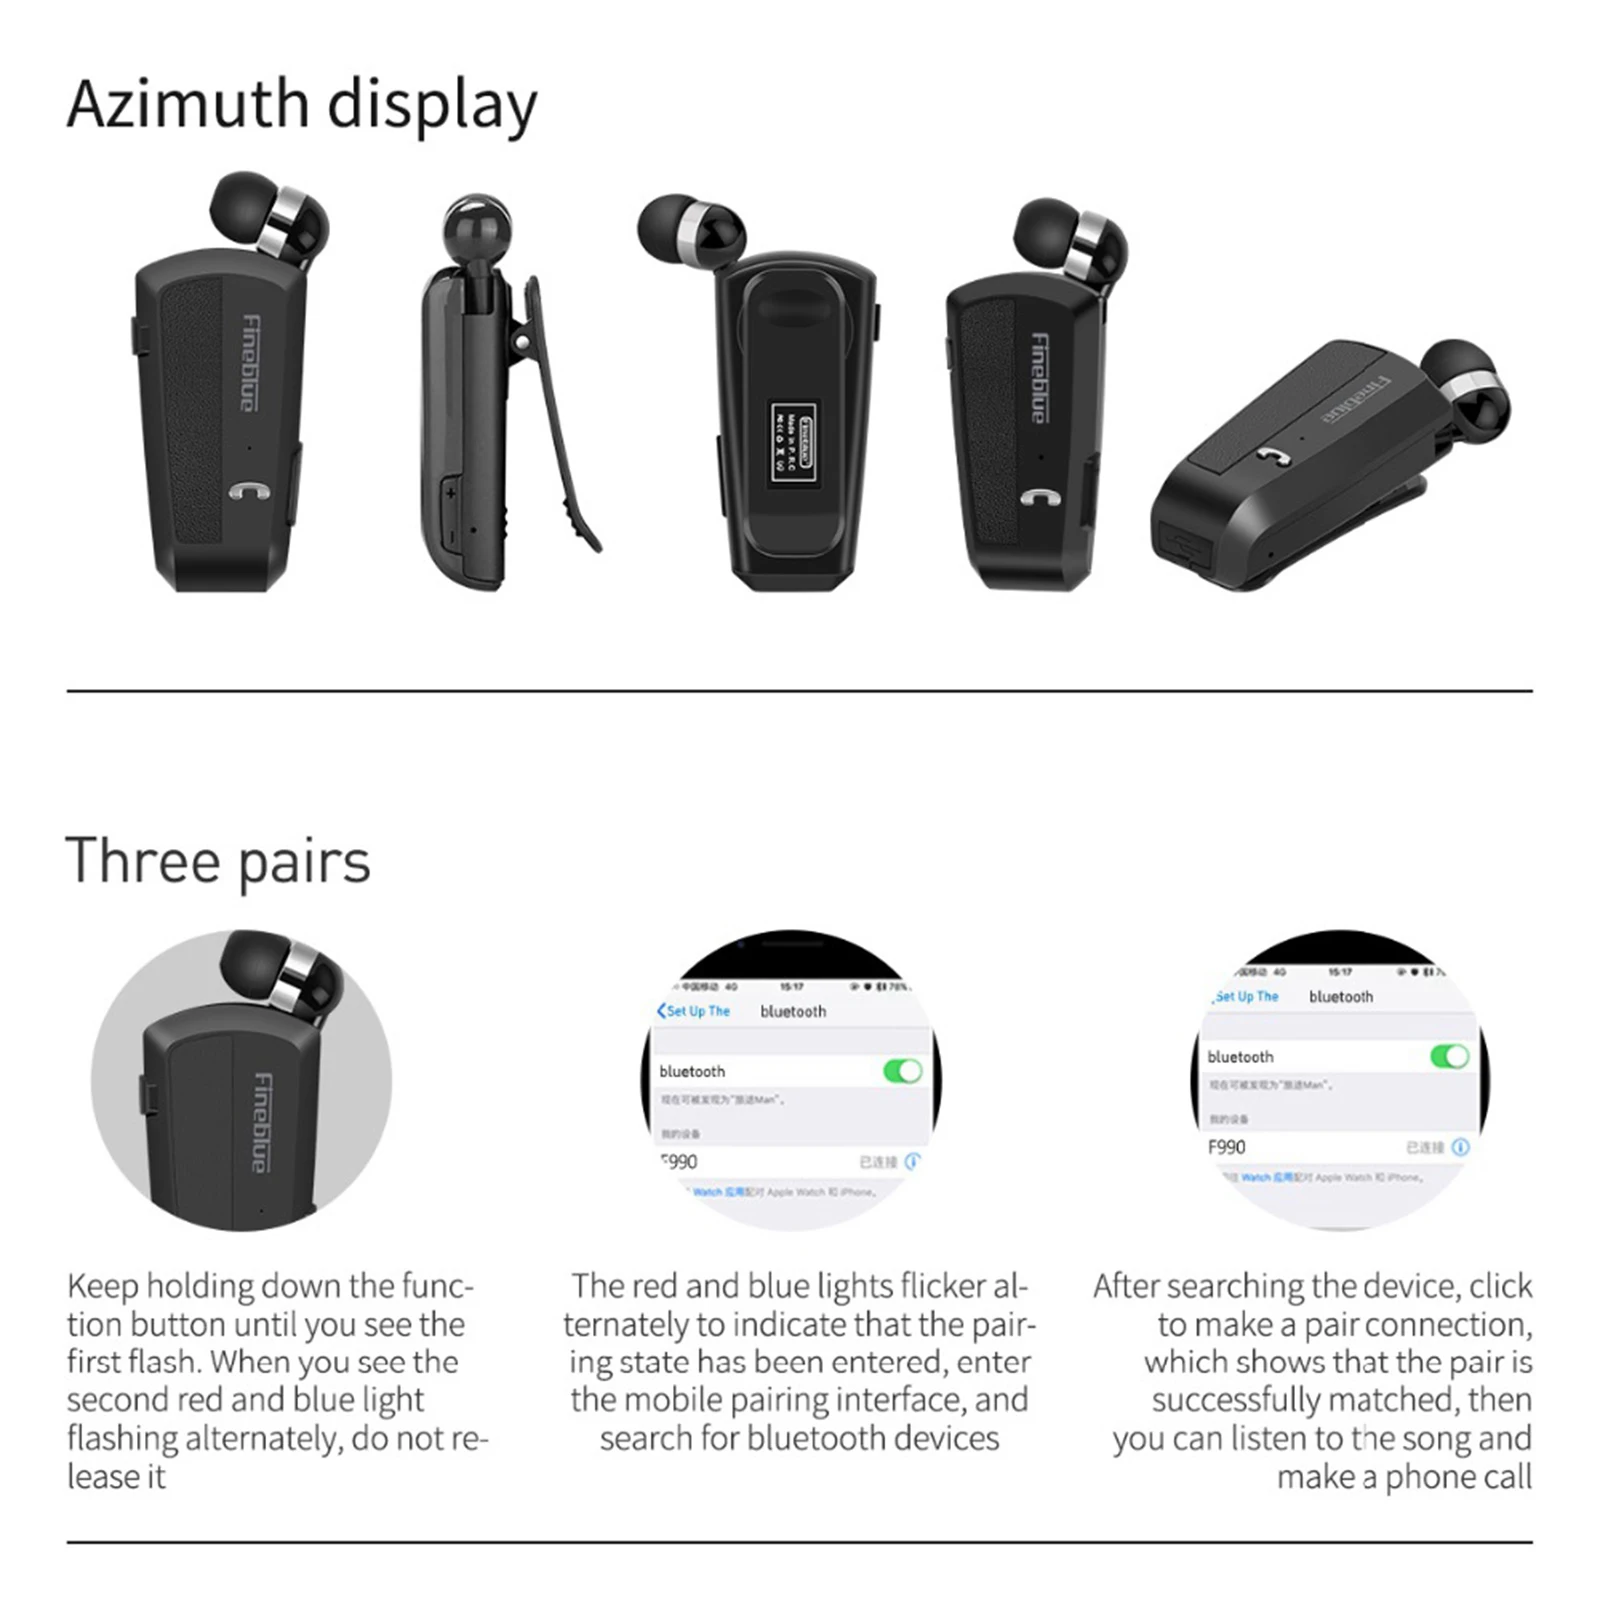 Fineblue F990 Bluetooth 4.0 Wireless Headset with Mic Retractable Stereo Headphone Collar Clip Business Workout Earphone Earbud